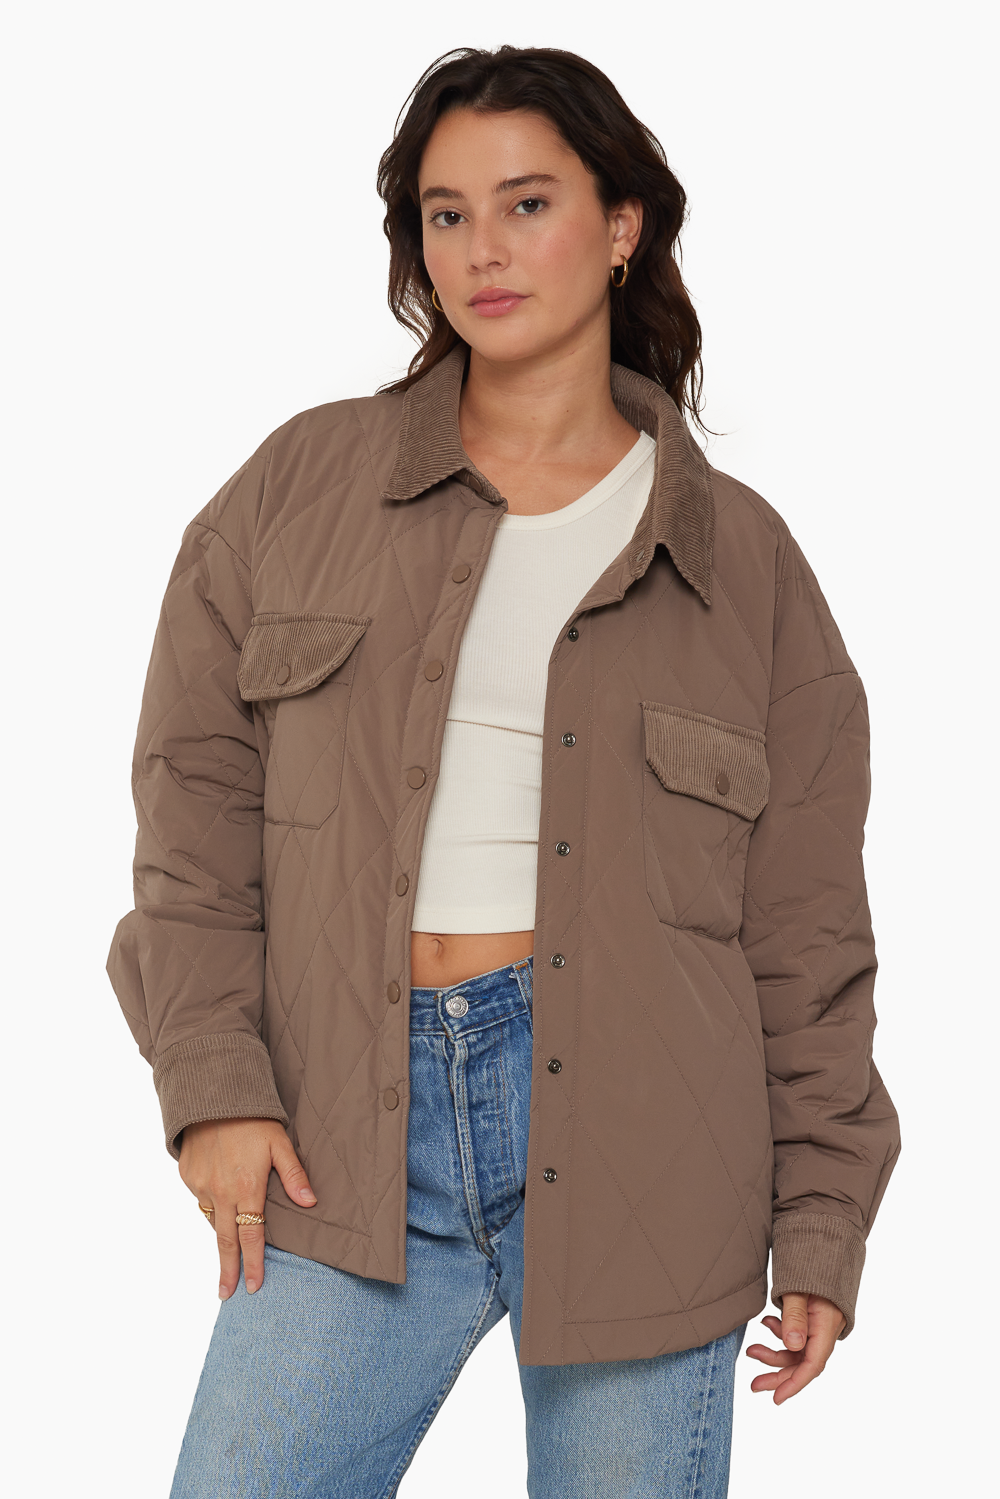 CORDUROY QUILTED CORDUROY JACKET - BARK Featured Image